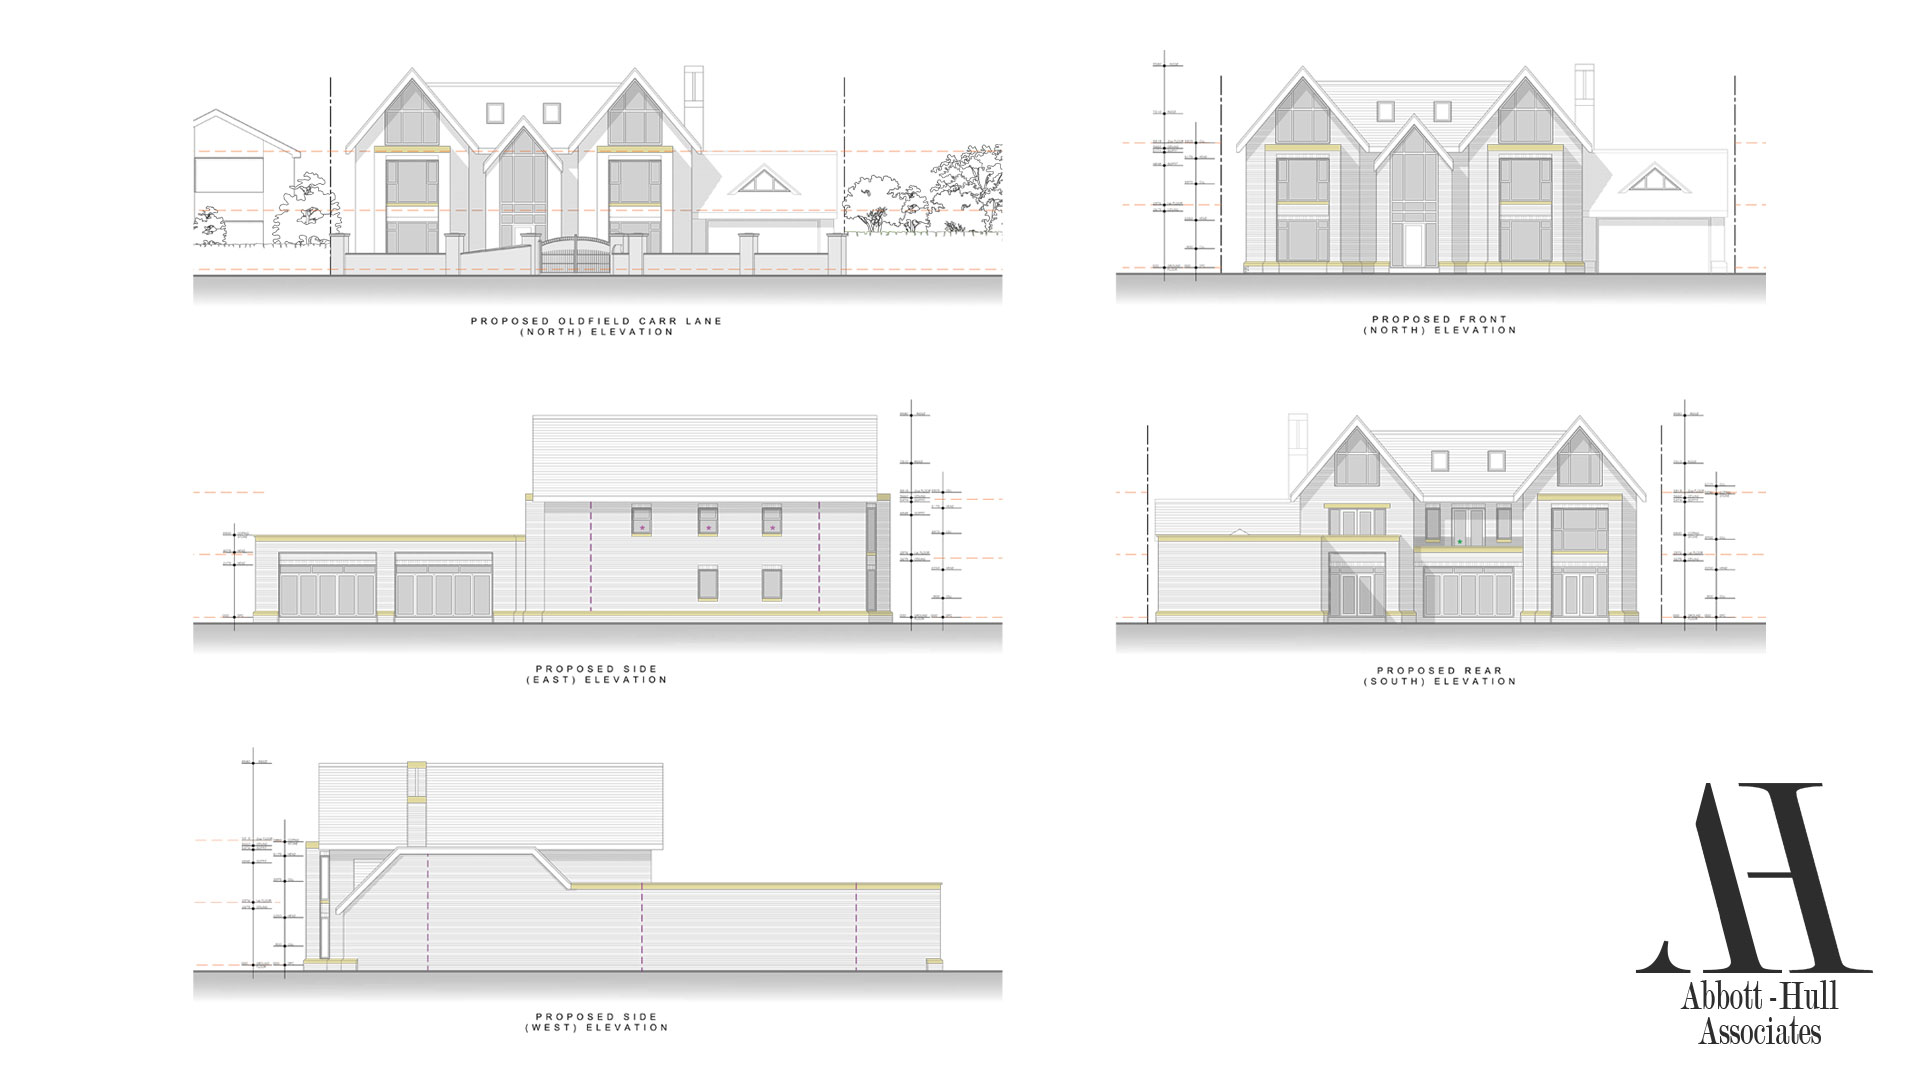 Oldfield Carr Lane, Poulton-le-Fylde, New Dwelling - Proposed Elevations